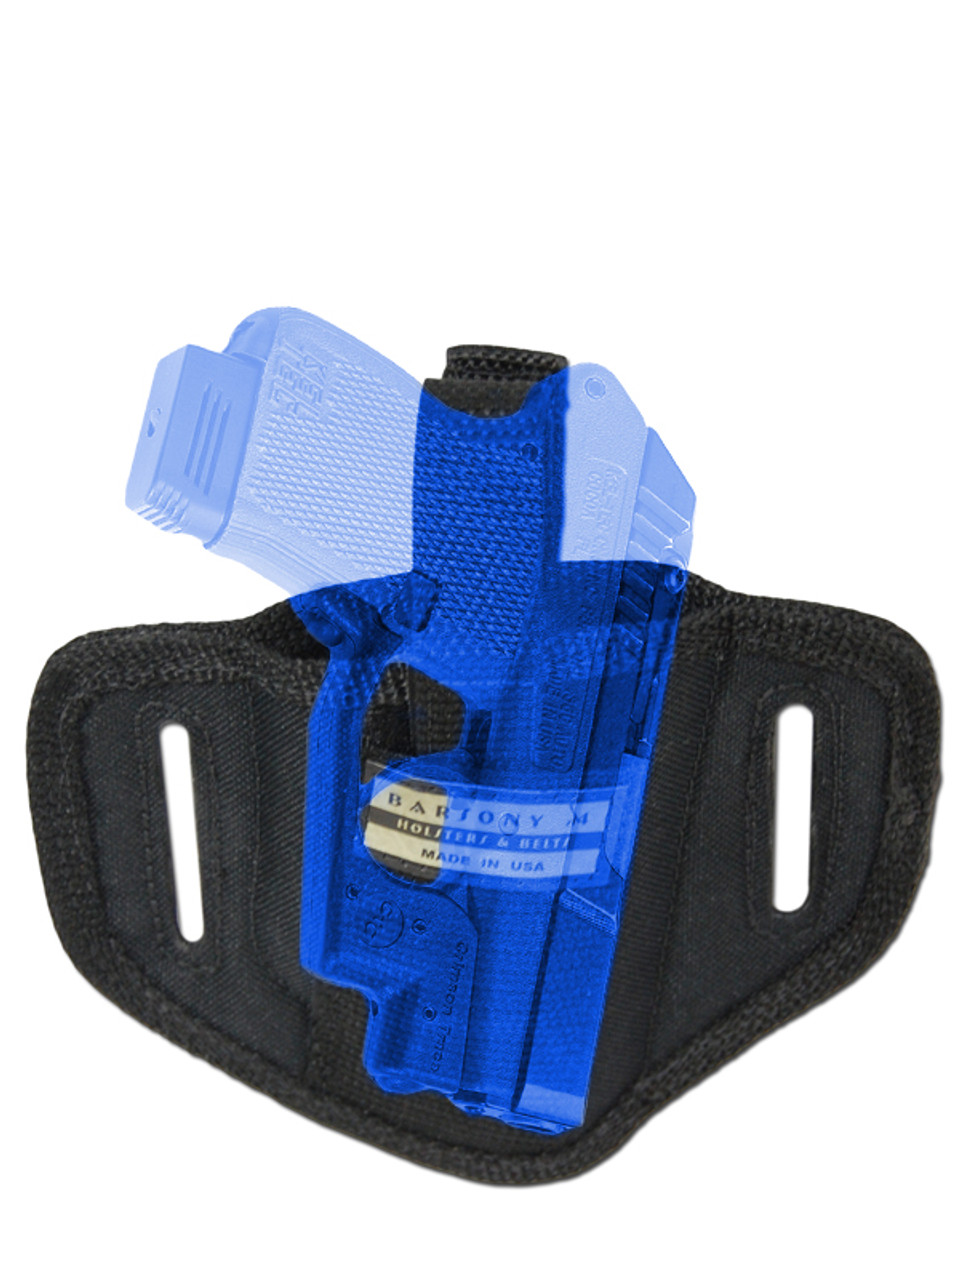 Ambidextrous Pancake Holster for Mini/Pocket .22 .25 .32 .380 Pistols with LASER